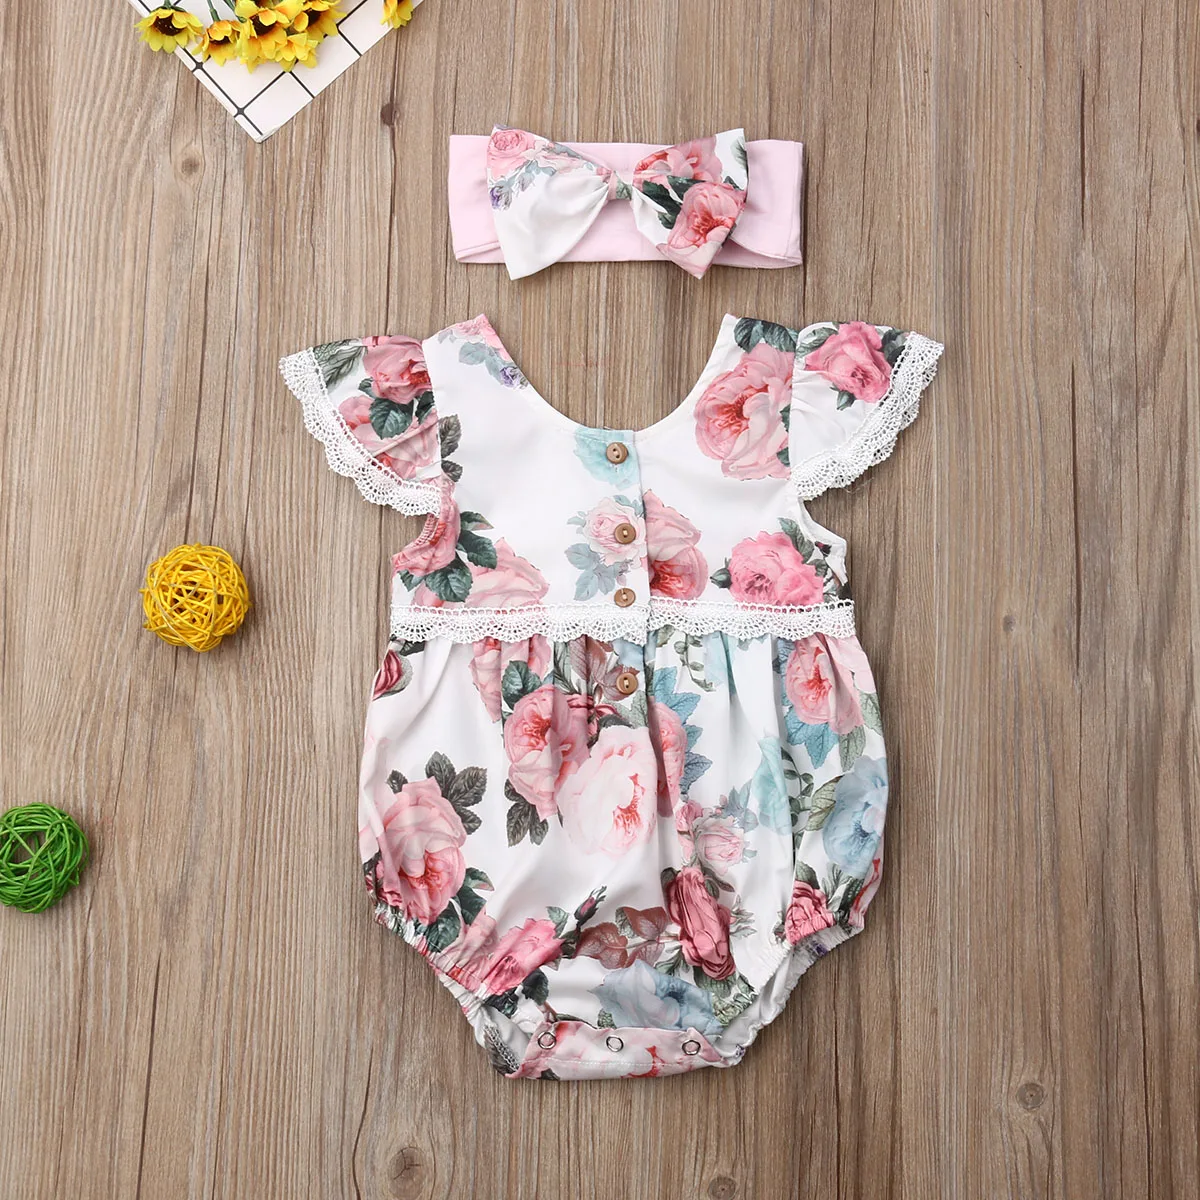 

Pudcoco Newborn Baby Girl Clothes Flower Print Fly Sleeve Lace Ruffle Romper Bowknot Headband 2Pcs Outfits Cotton Clothes